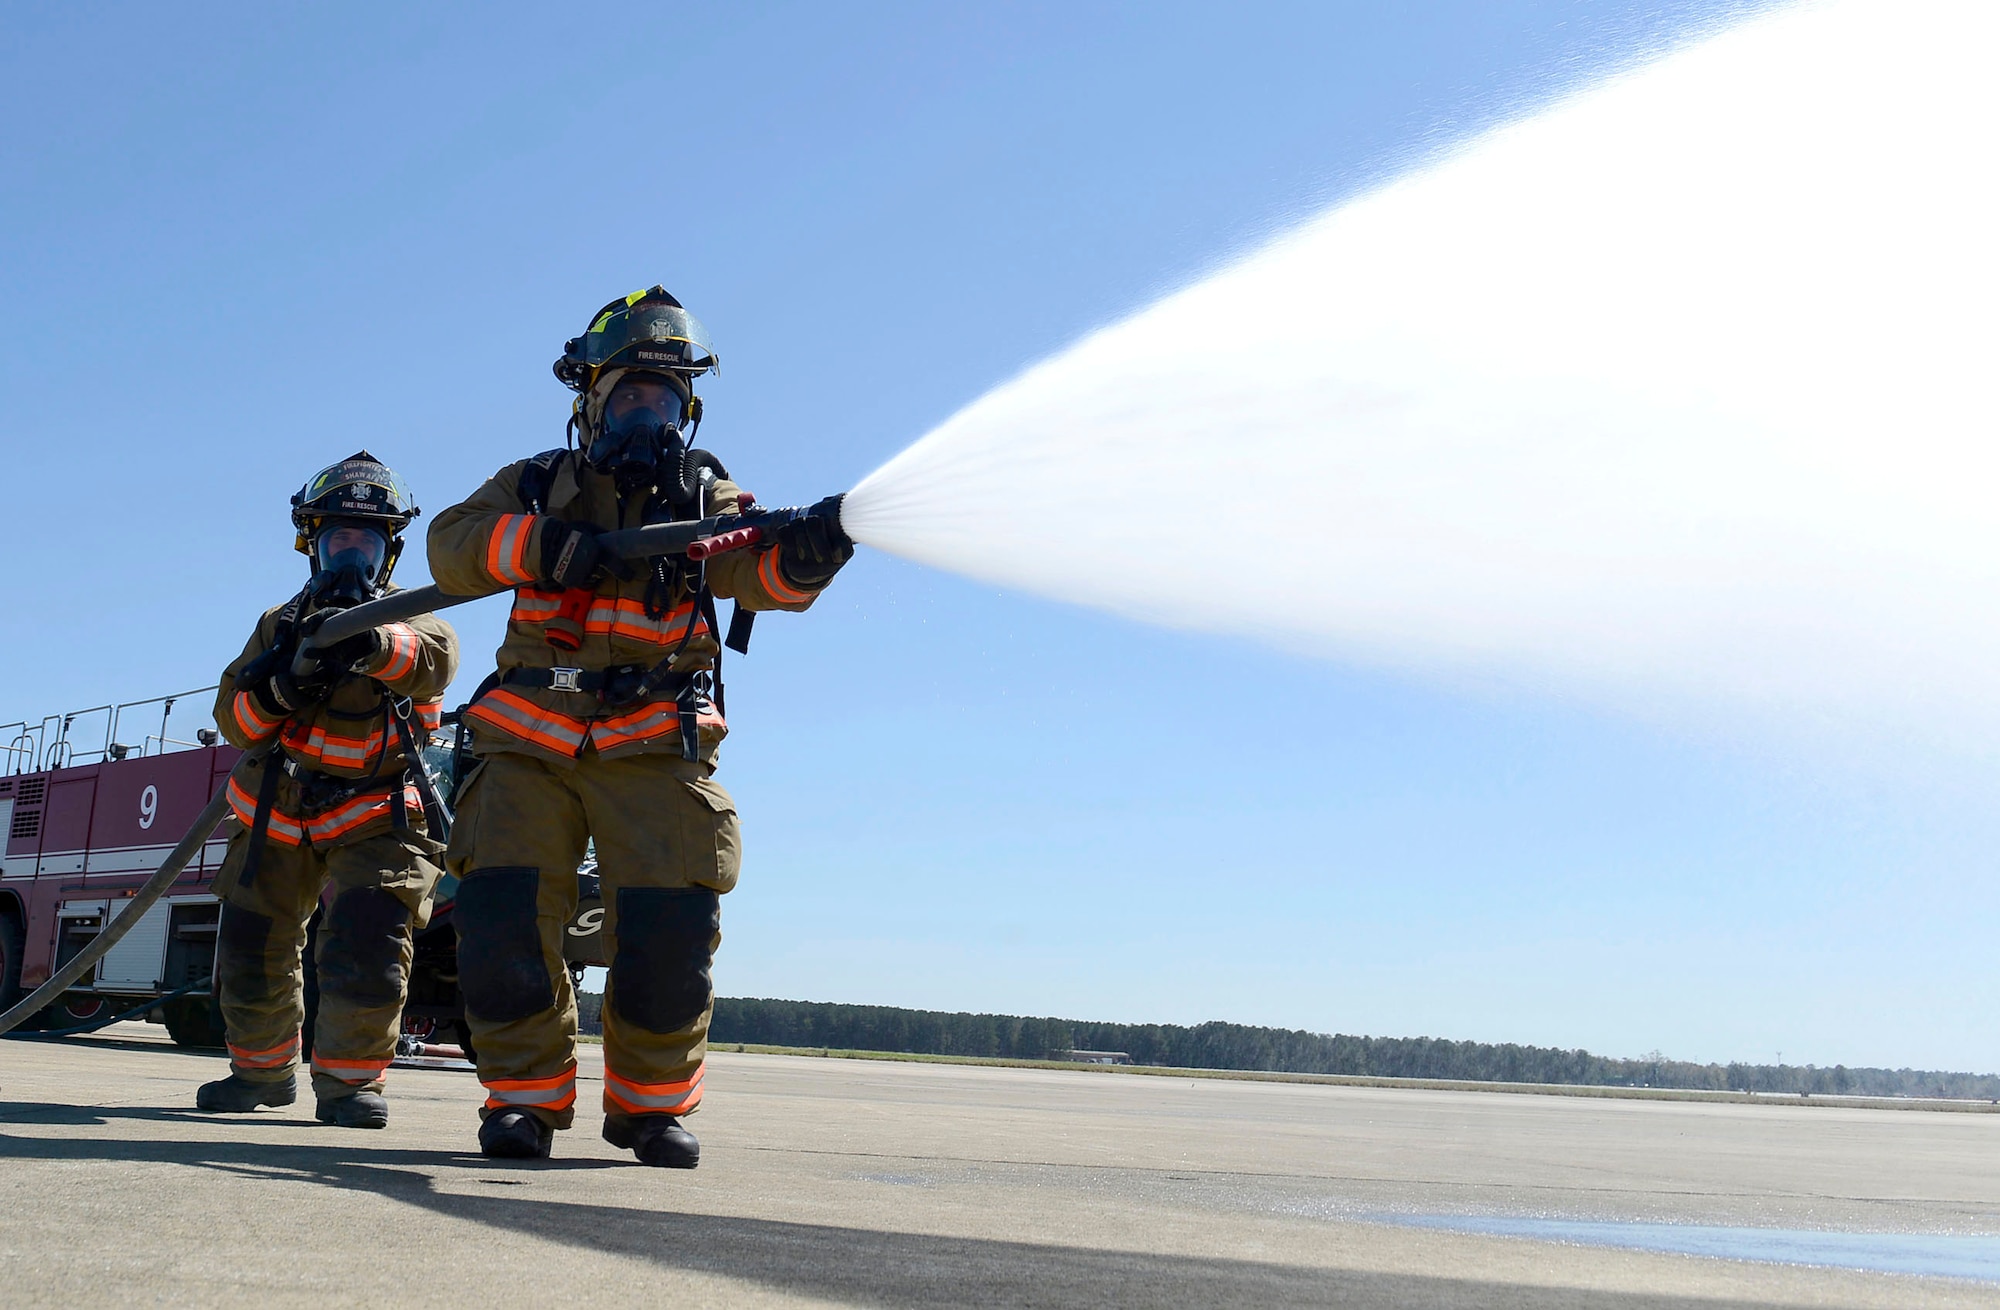 U.S. Air Force Senior Airman Joan Ortega, 20th Civil Engineer Squadron firefighter and Airman 1st Class John Derboghossian, 20th CES firefighter apprentice, use an inch and three quarter attack line hose while training on the flightline at Shaw Air Force Base, March 15, 2016. The fire hose has the power to shoot over 100 pounds of water per minute and helps in the rapid clearing of fire on buildings, vehicles and aircrafts. (U.S. Air Force photo by Airman 1st Class Christopher Maldonado)